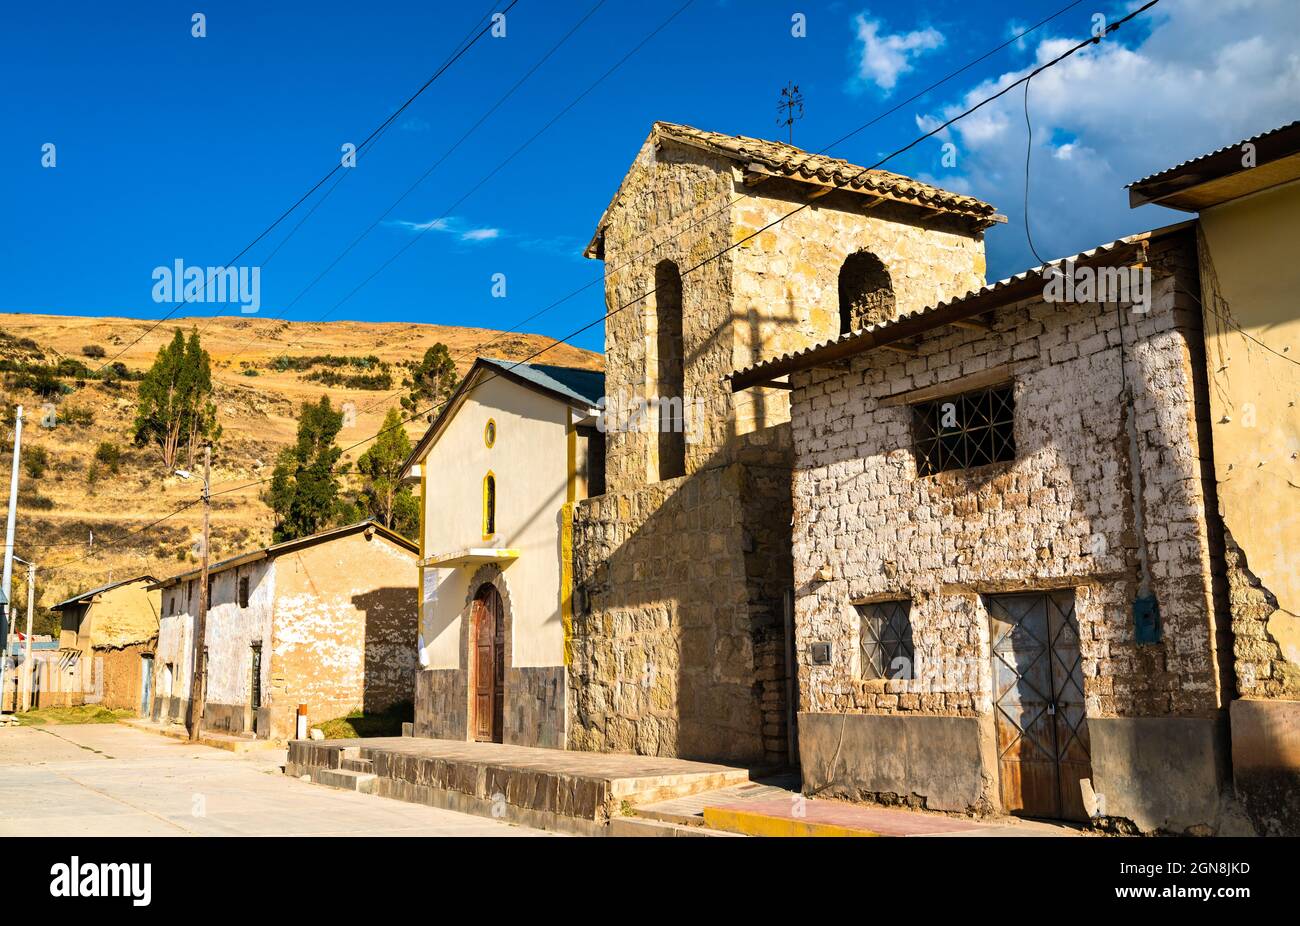 Antacocha, typical Peruvian village in the Andes Stock Photo